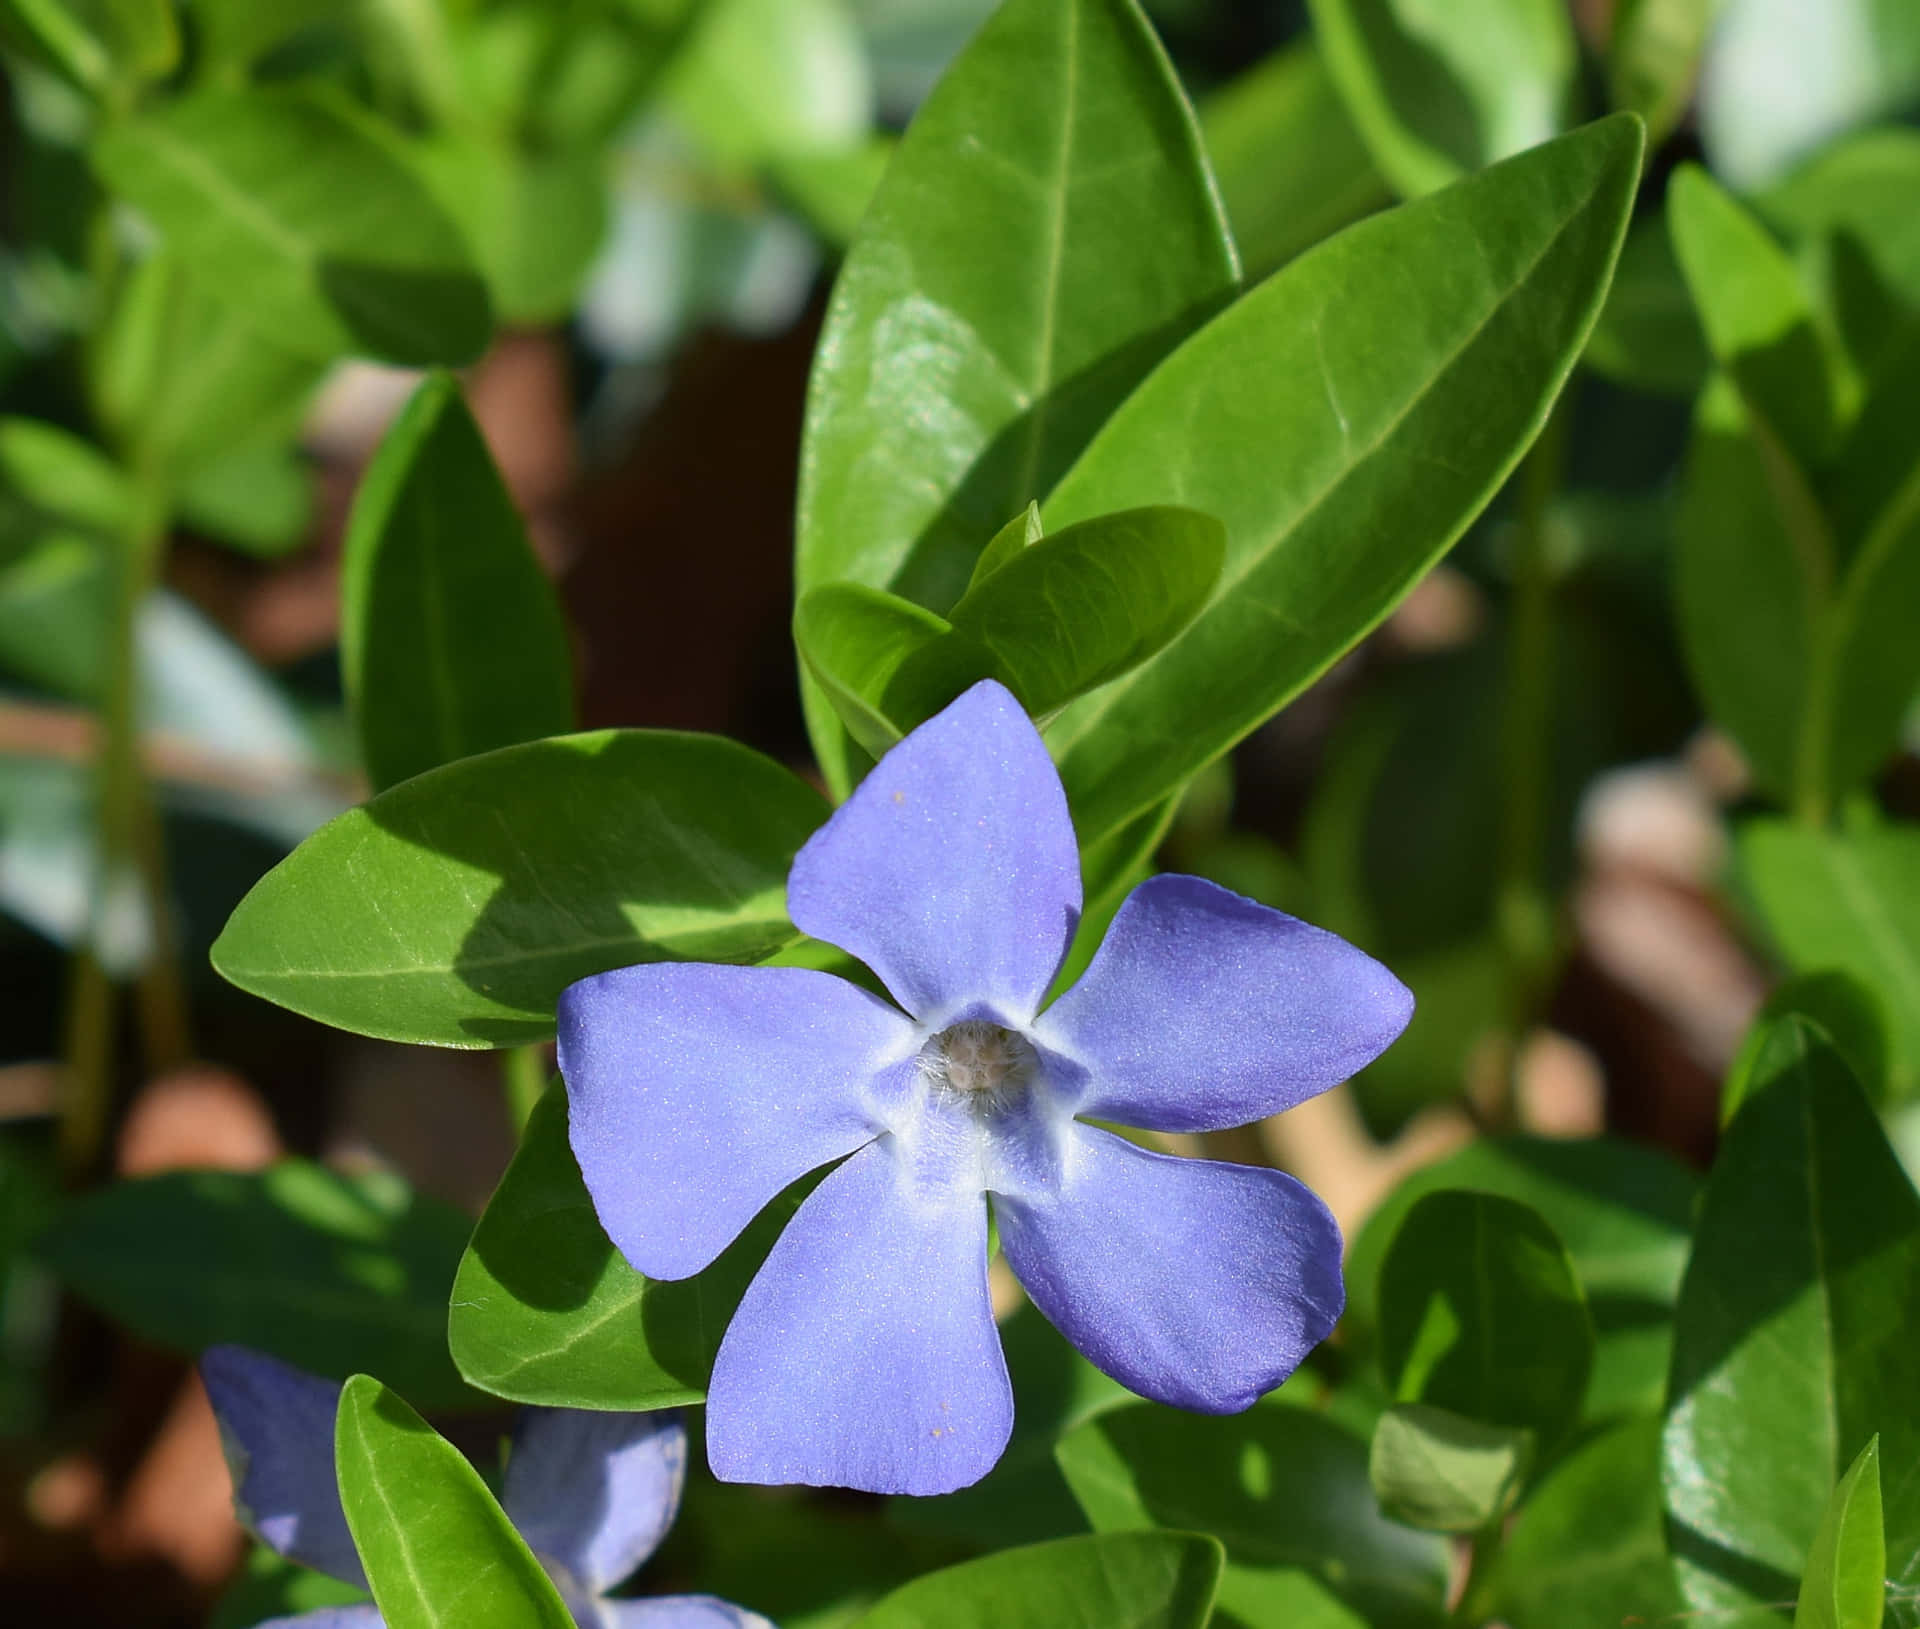 Periwinkle blue is a color that creates an air of serenity and relaxation.